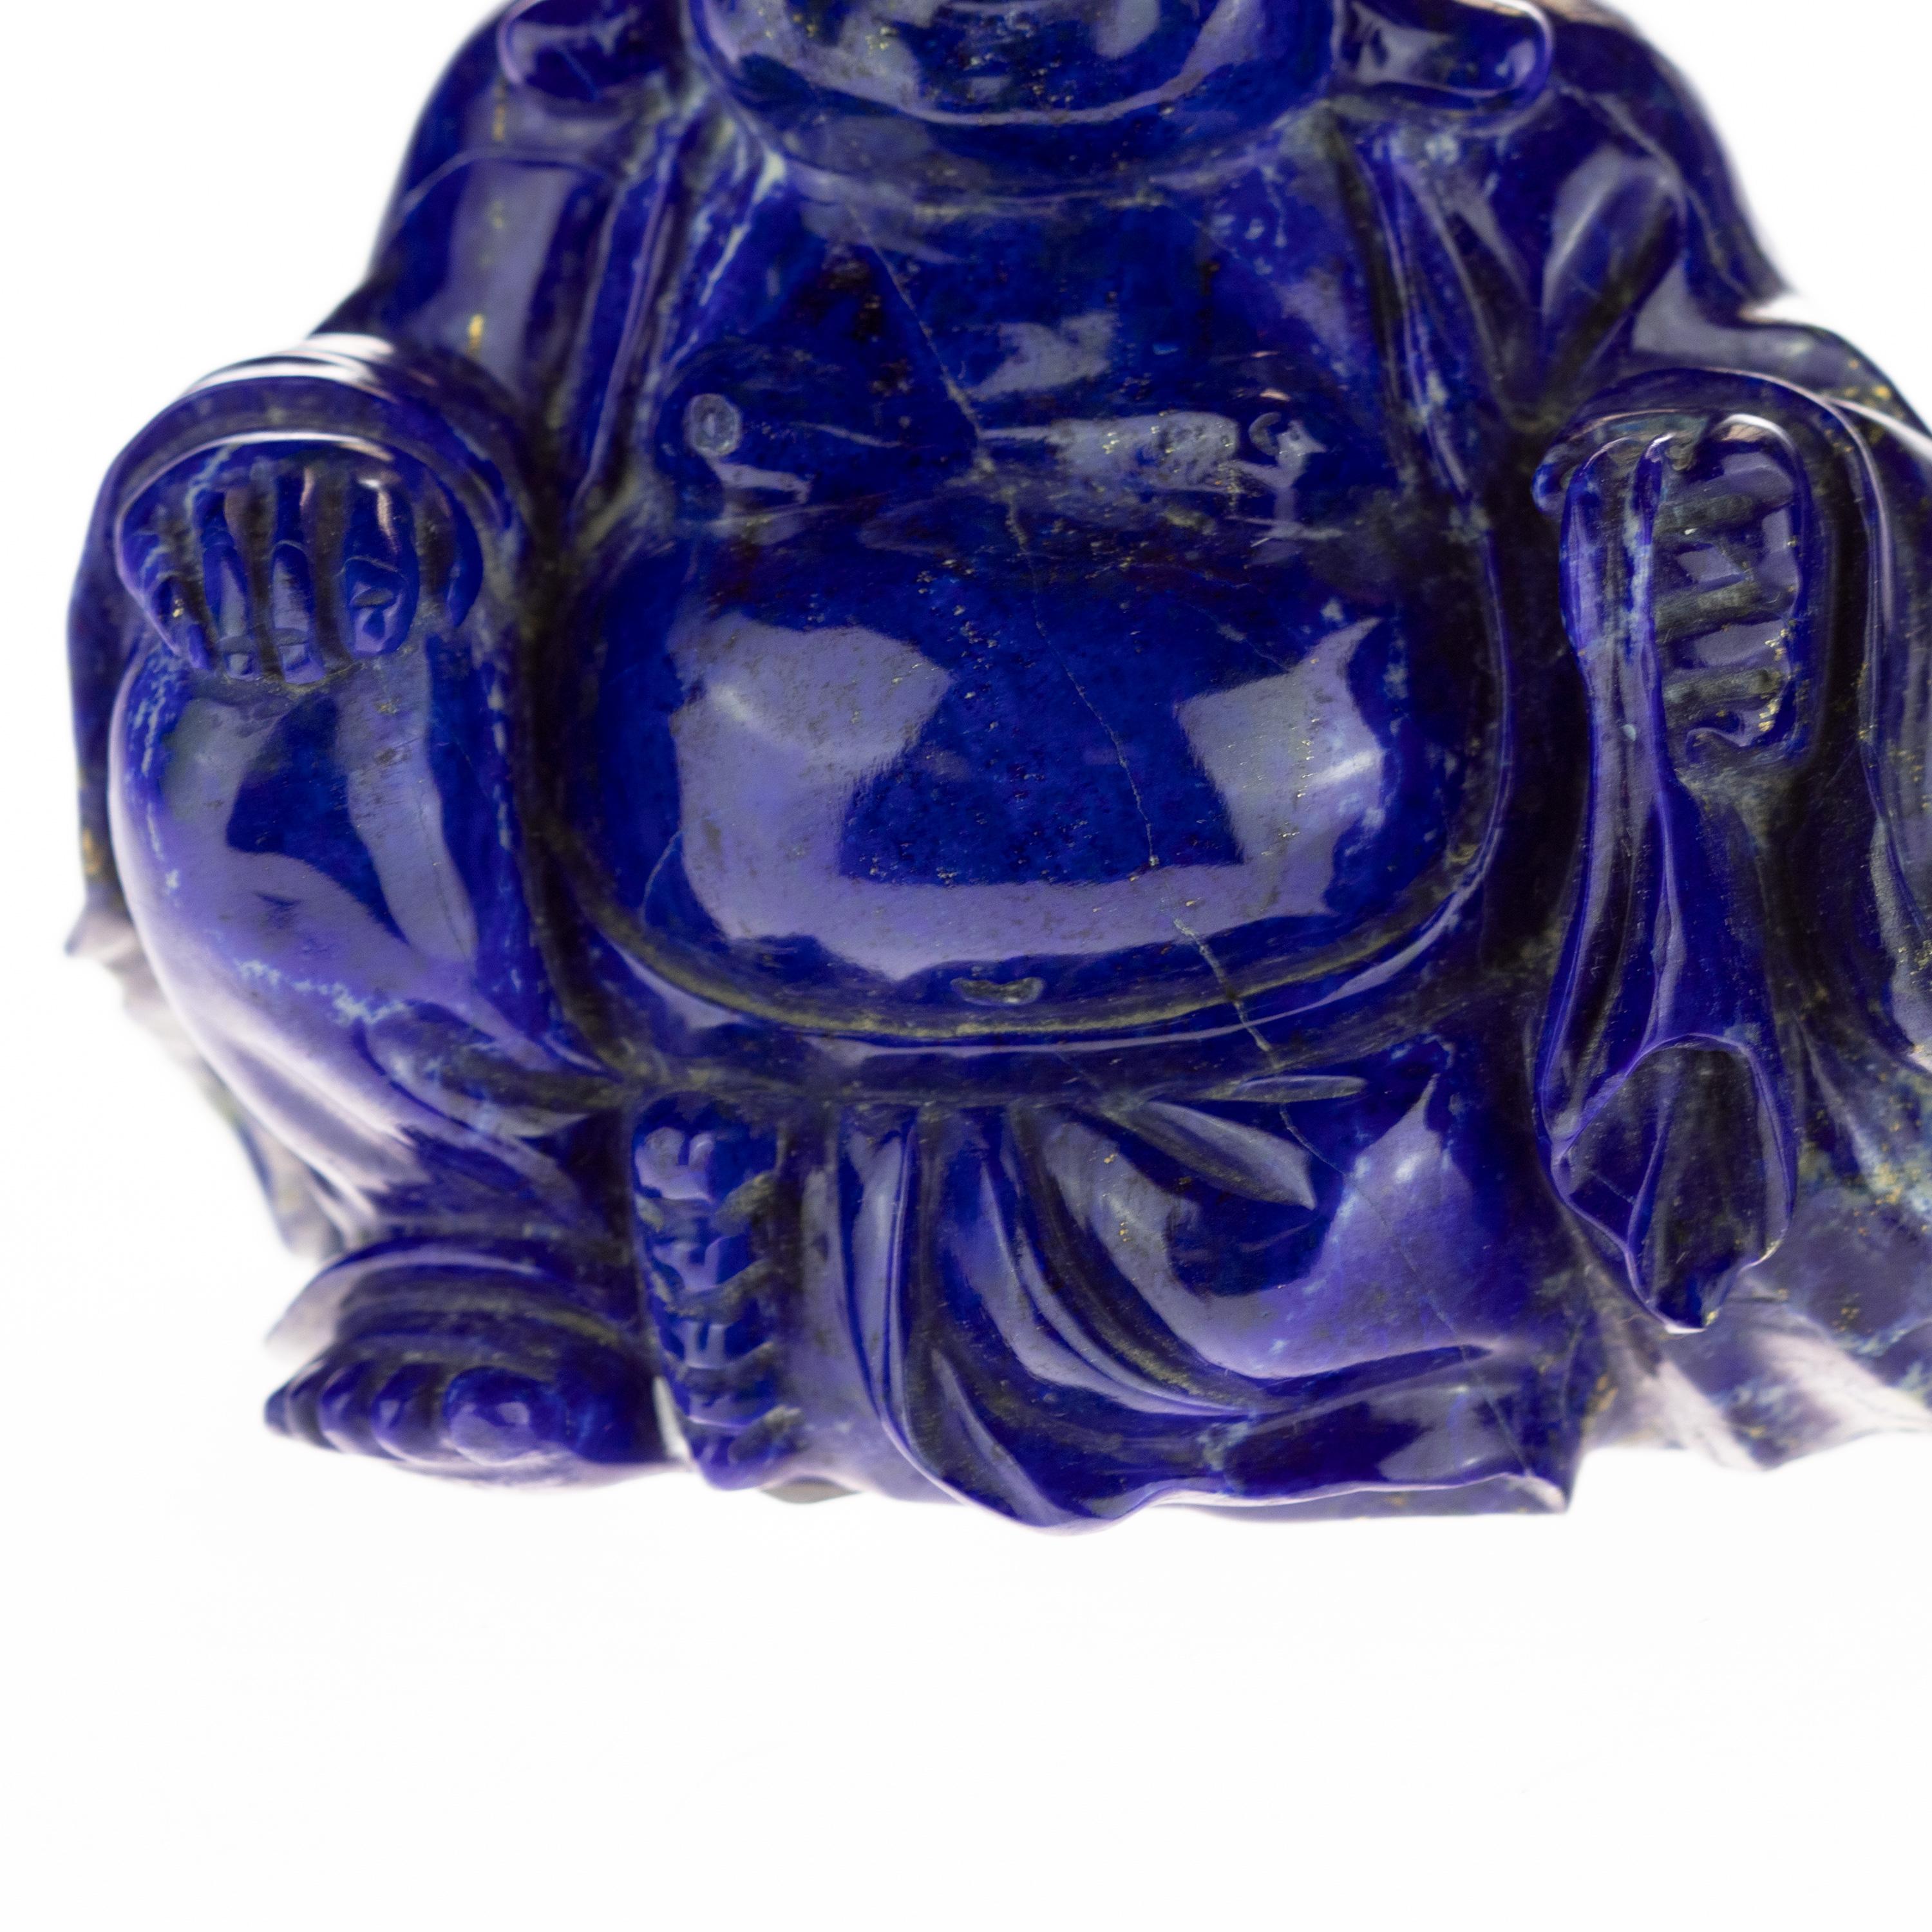 Lapis Lazuli Meditation Buddha Carved Gemstone Asian Art Statue Sculpture In Excellent Condition For Sale In Milano, IT